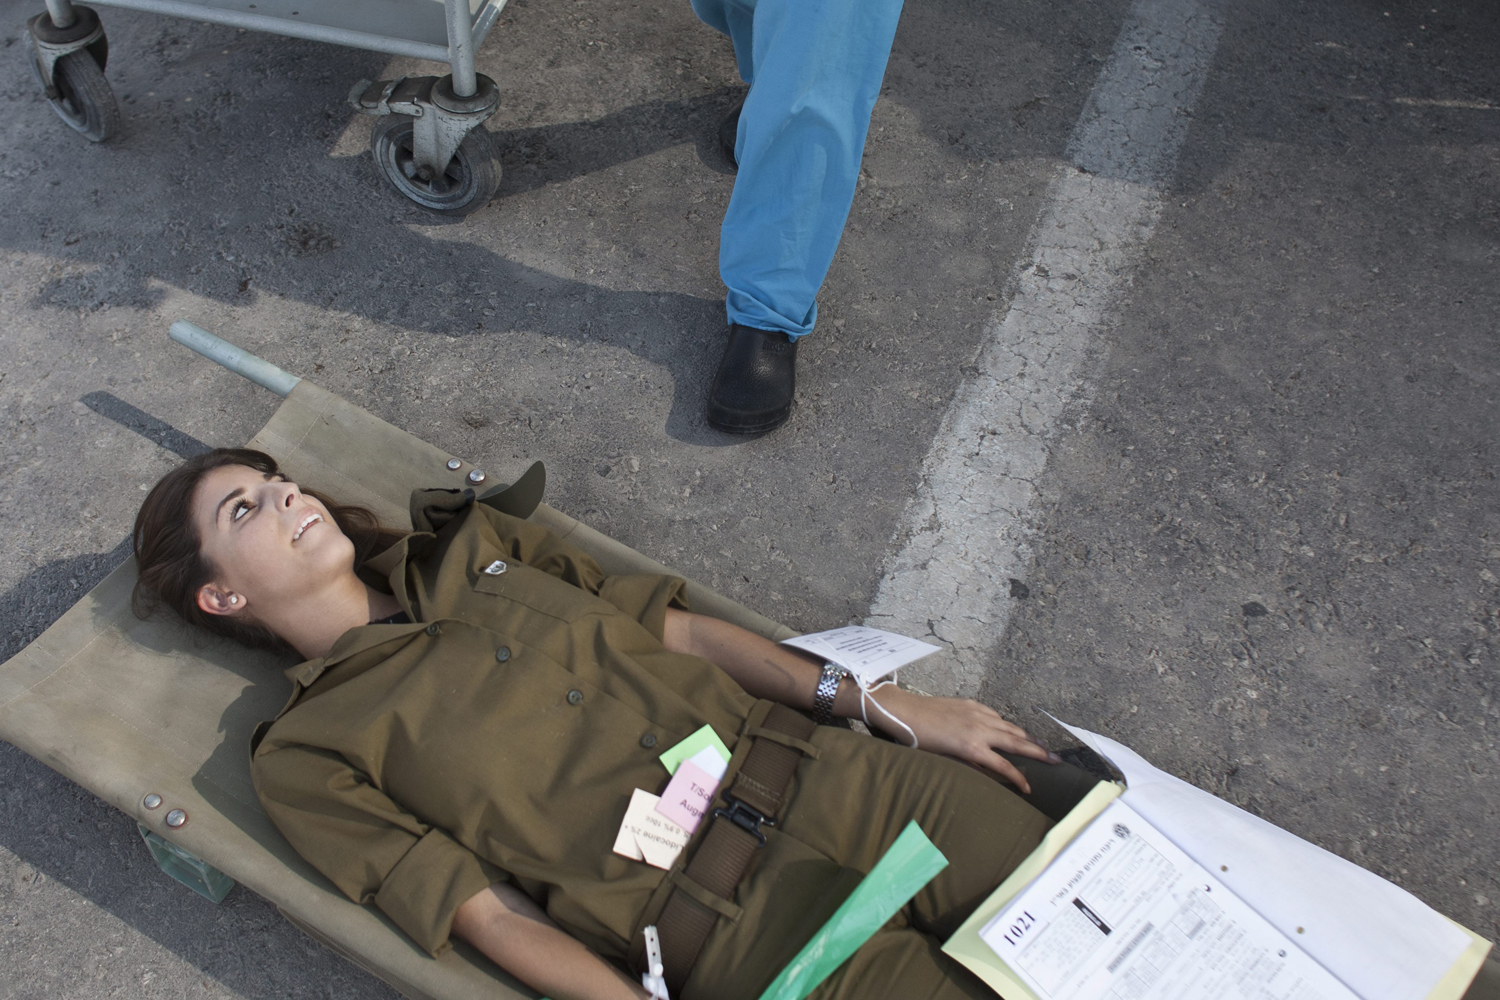 Image: Oct. 22, 2012. Medical staff at the Rambam hospital attend to a soldier pretending to be injured following a mock earthquake exercise in Haifa, Israel.